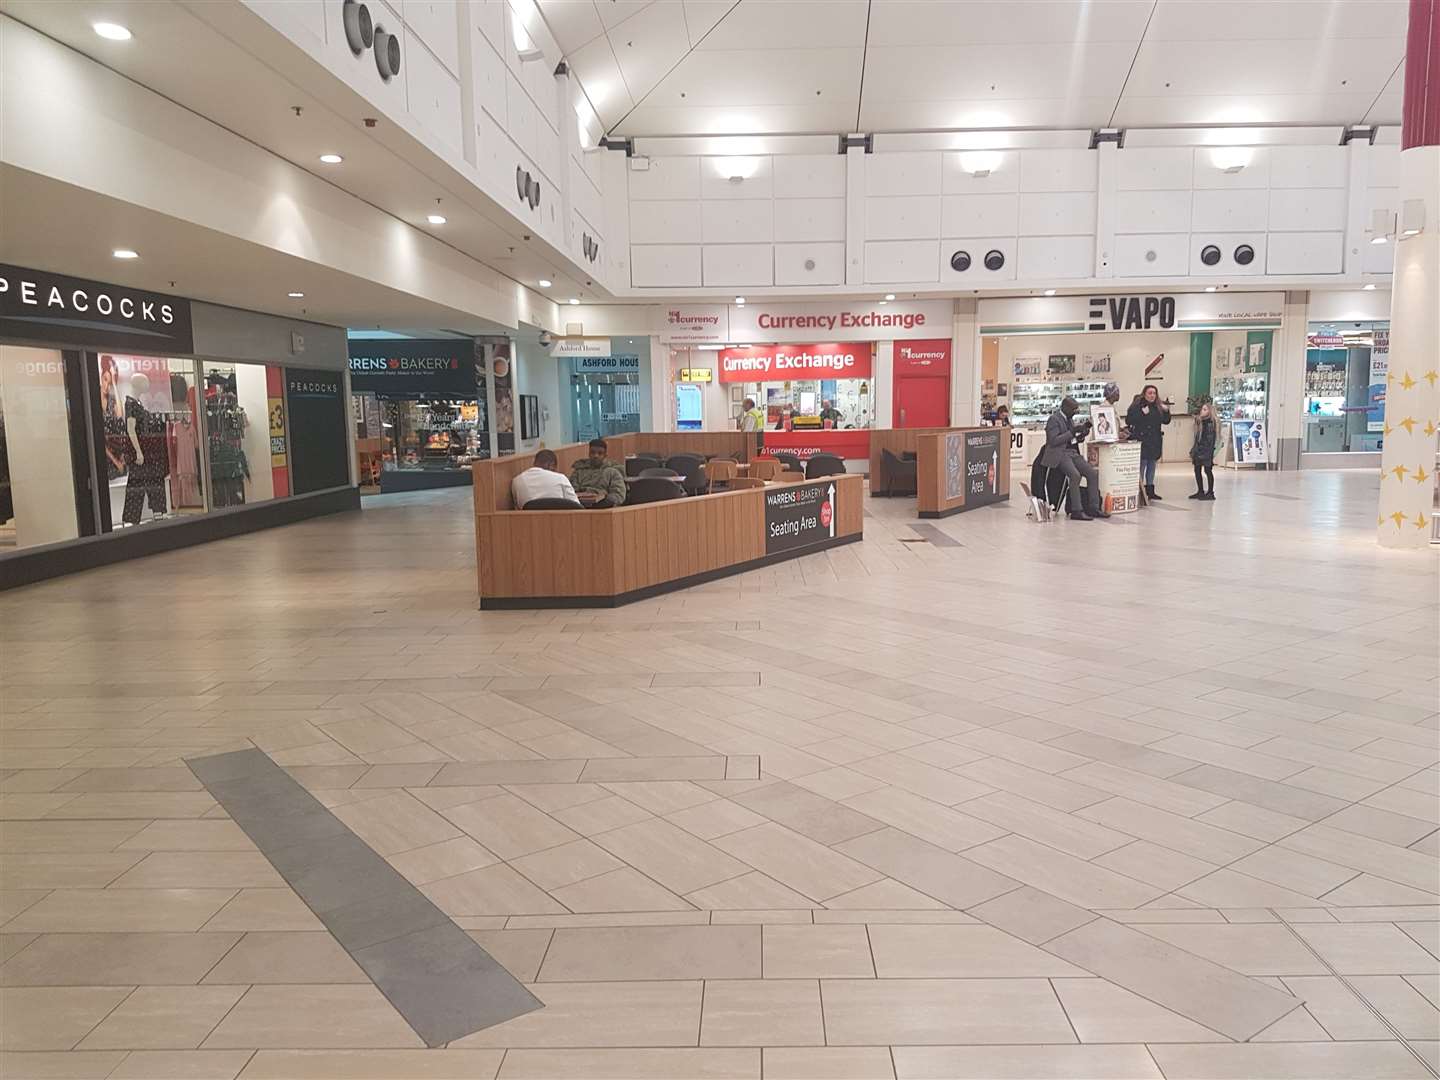 The confrontation is believed to have occurred in this part of Ashford's County Square shopping centre